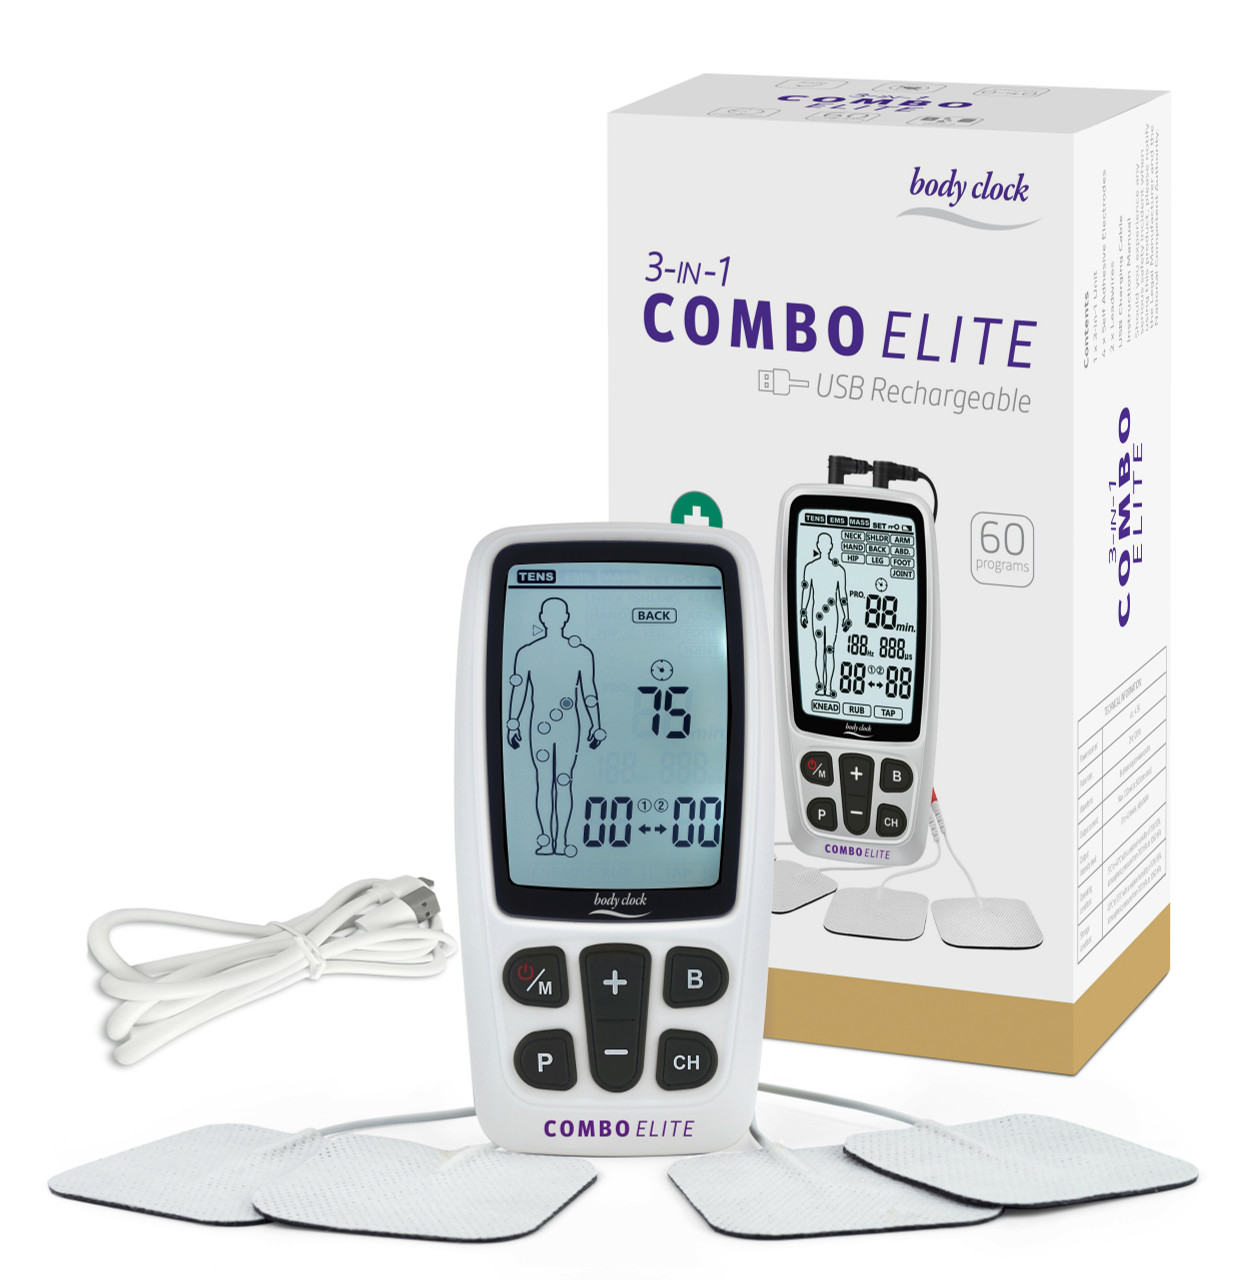 Electrical Stimulation Tens Unit 3-in-1 TENS Machine EMS and Fitness  Combination